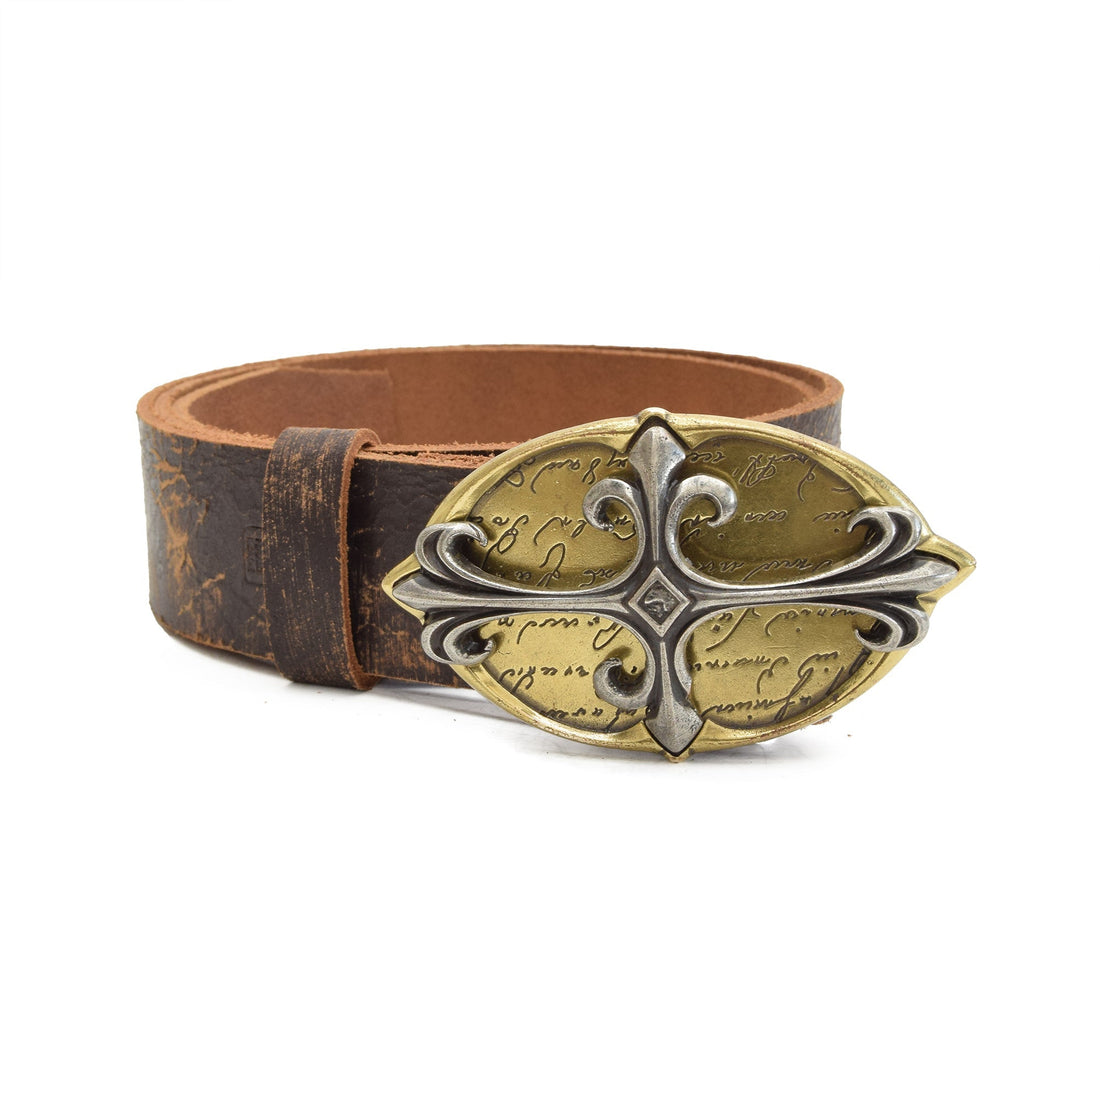 Royal Leather Belt Brown with Changeable Buckle - 80 - Belts Zengoda Shop online from Artisan Brands